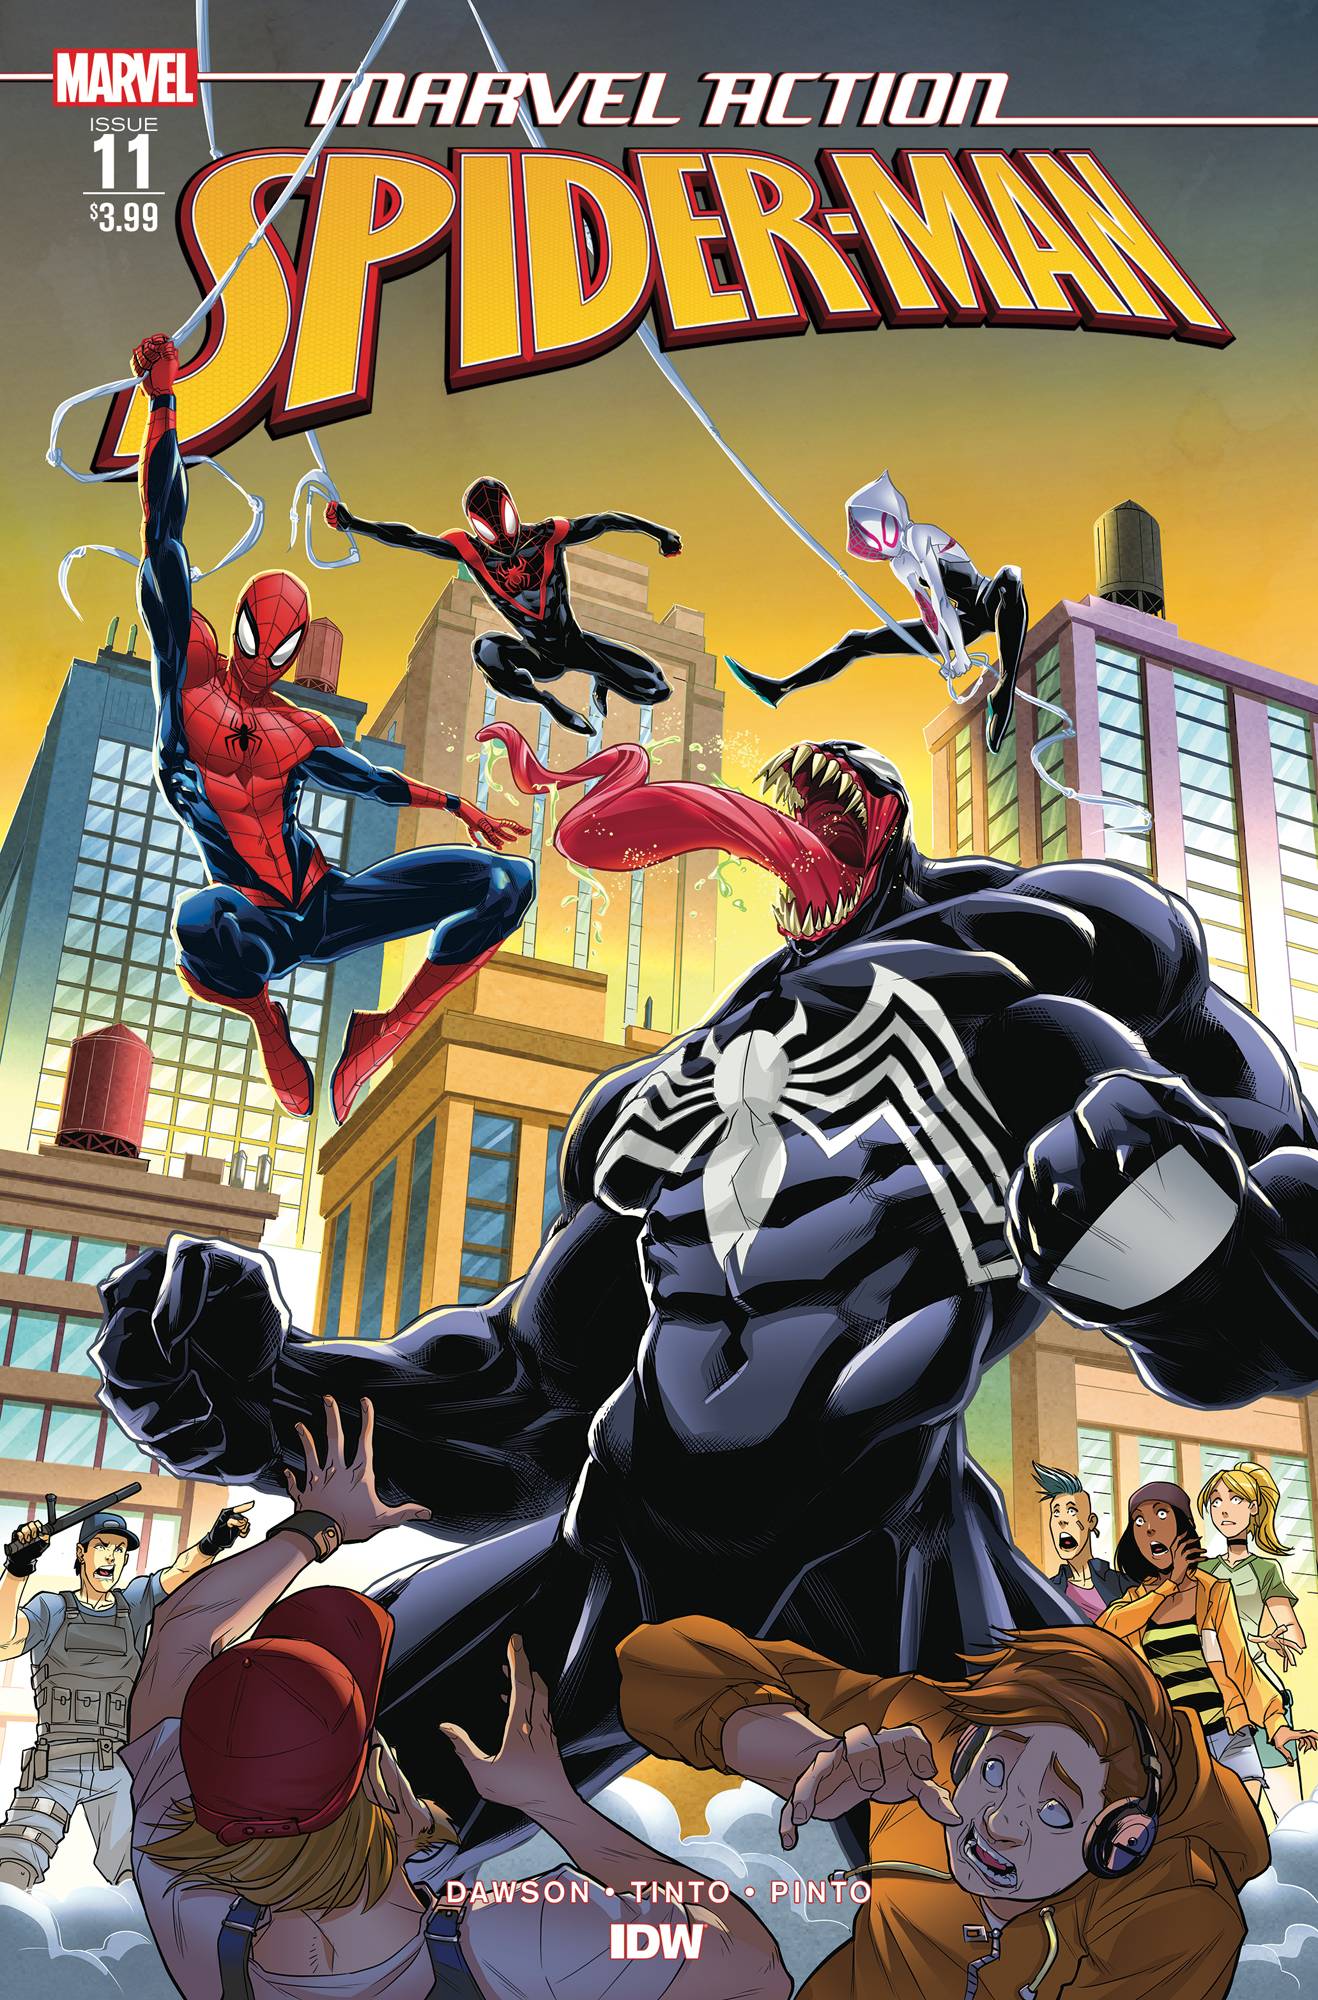 Marvel Action Spider-Man #11 Cover A Tinto